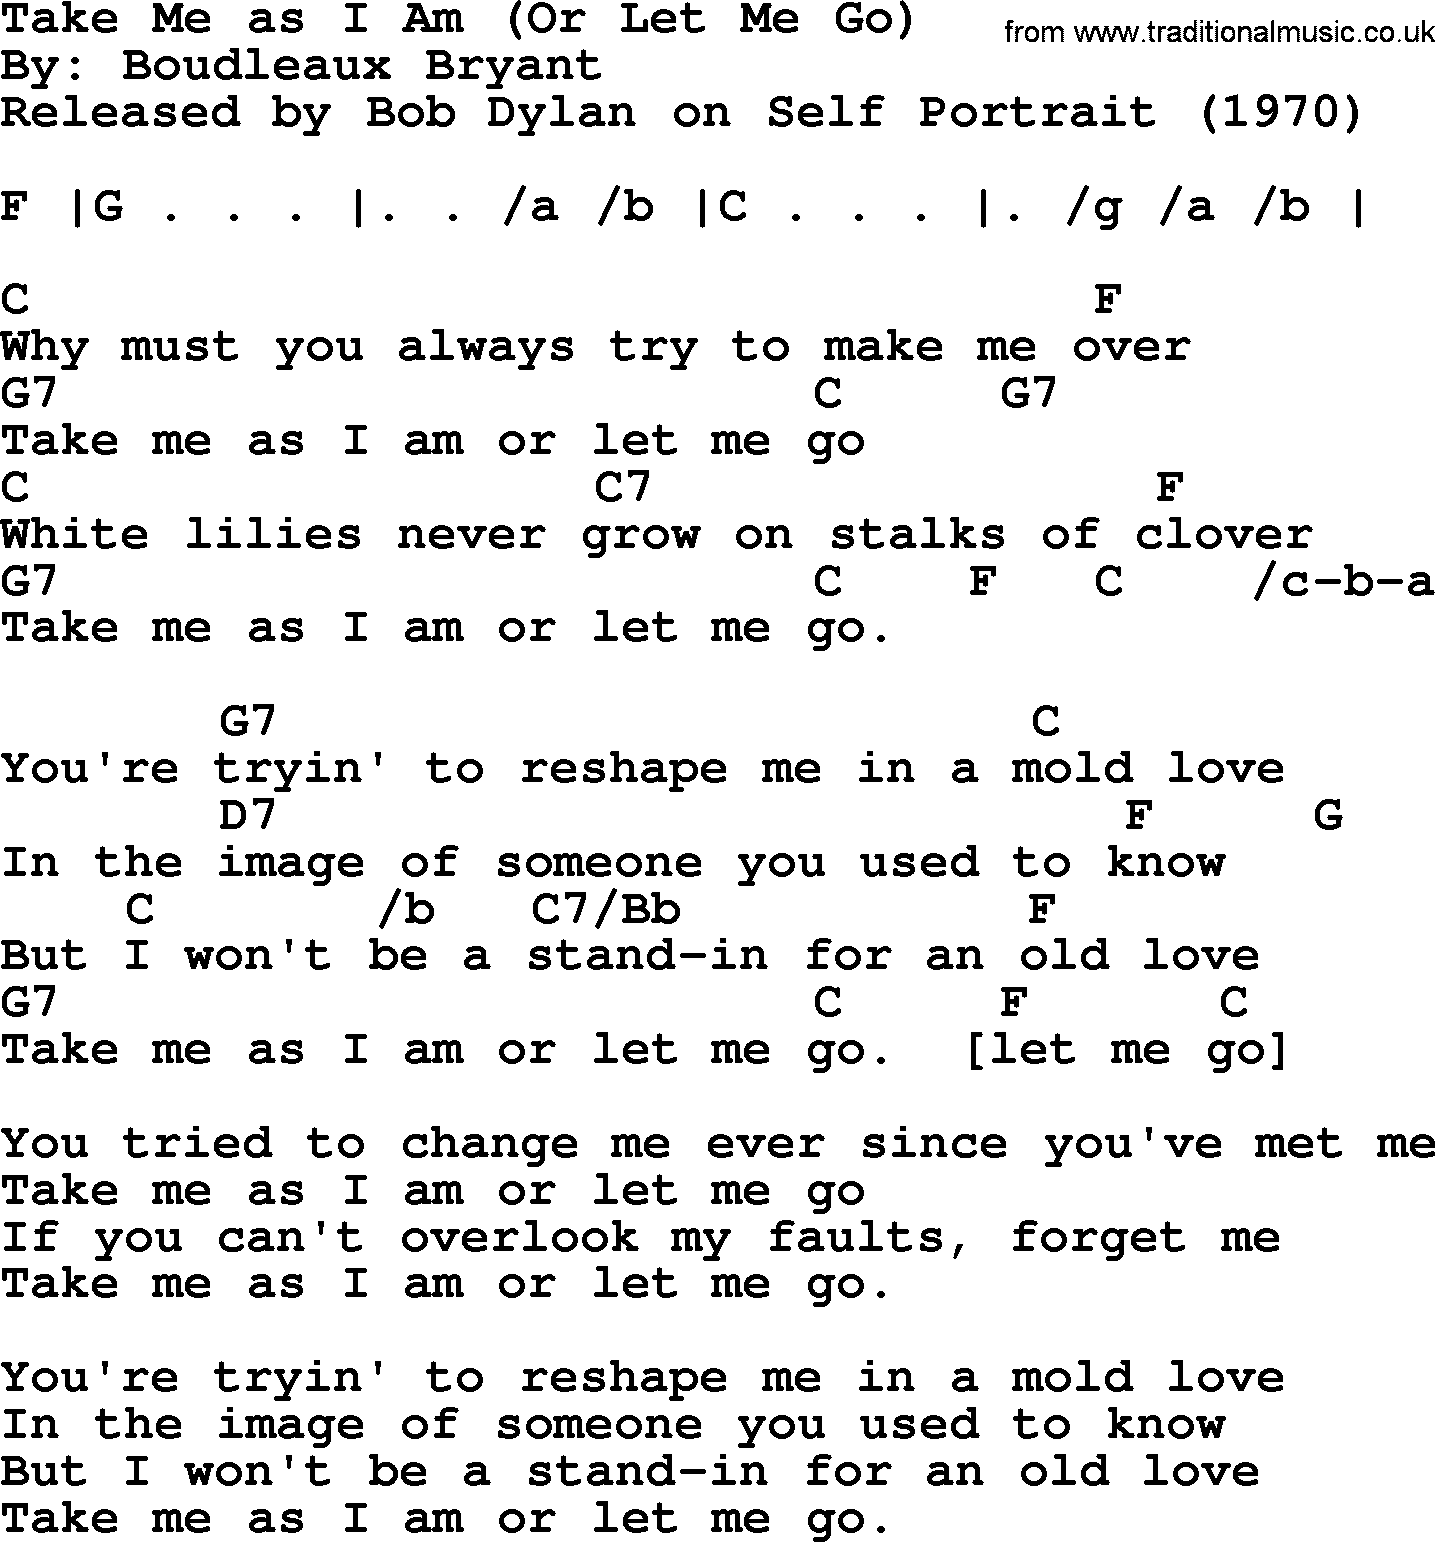 Bob Dylan song, lyrics with chords - Take Me as I Am (Or Let Me Go)